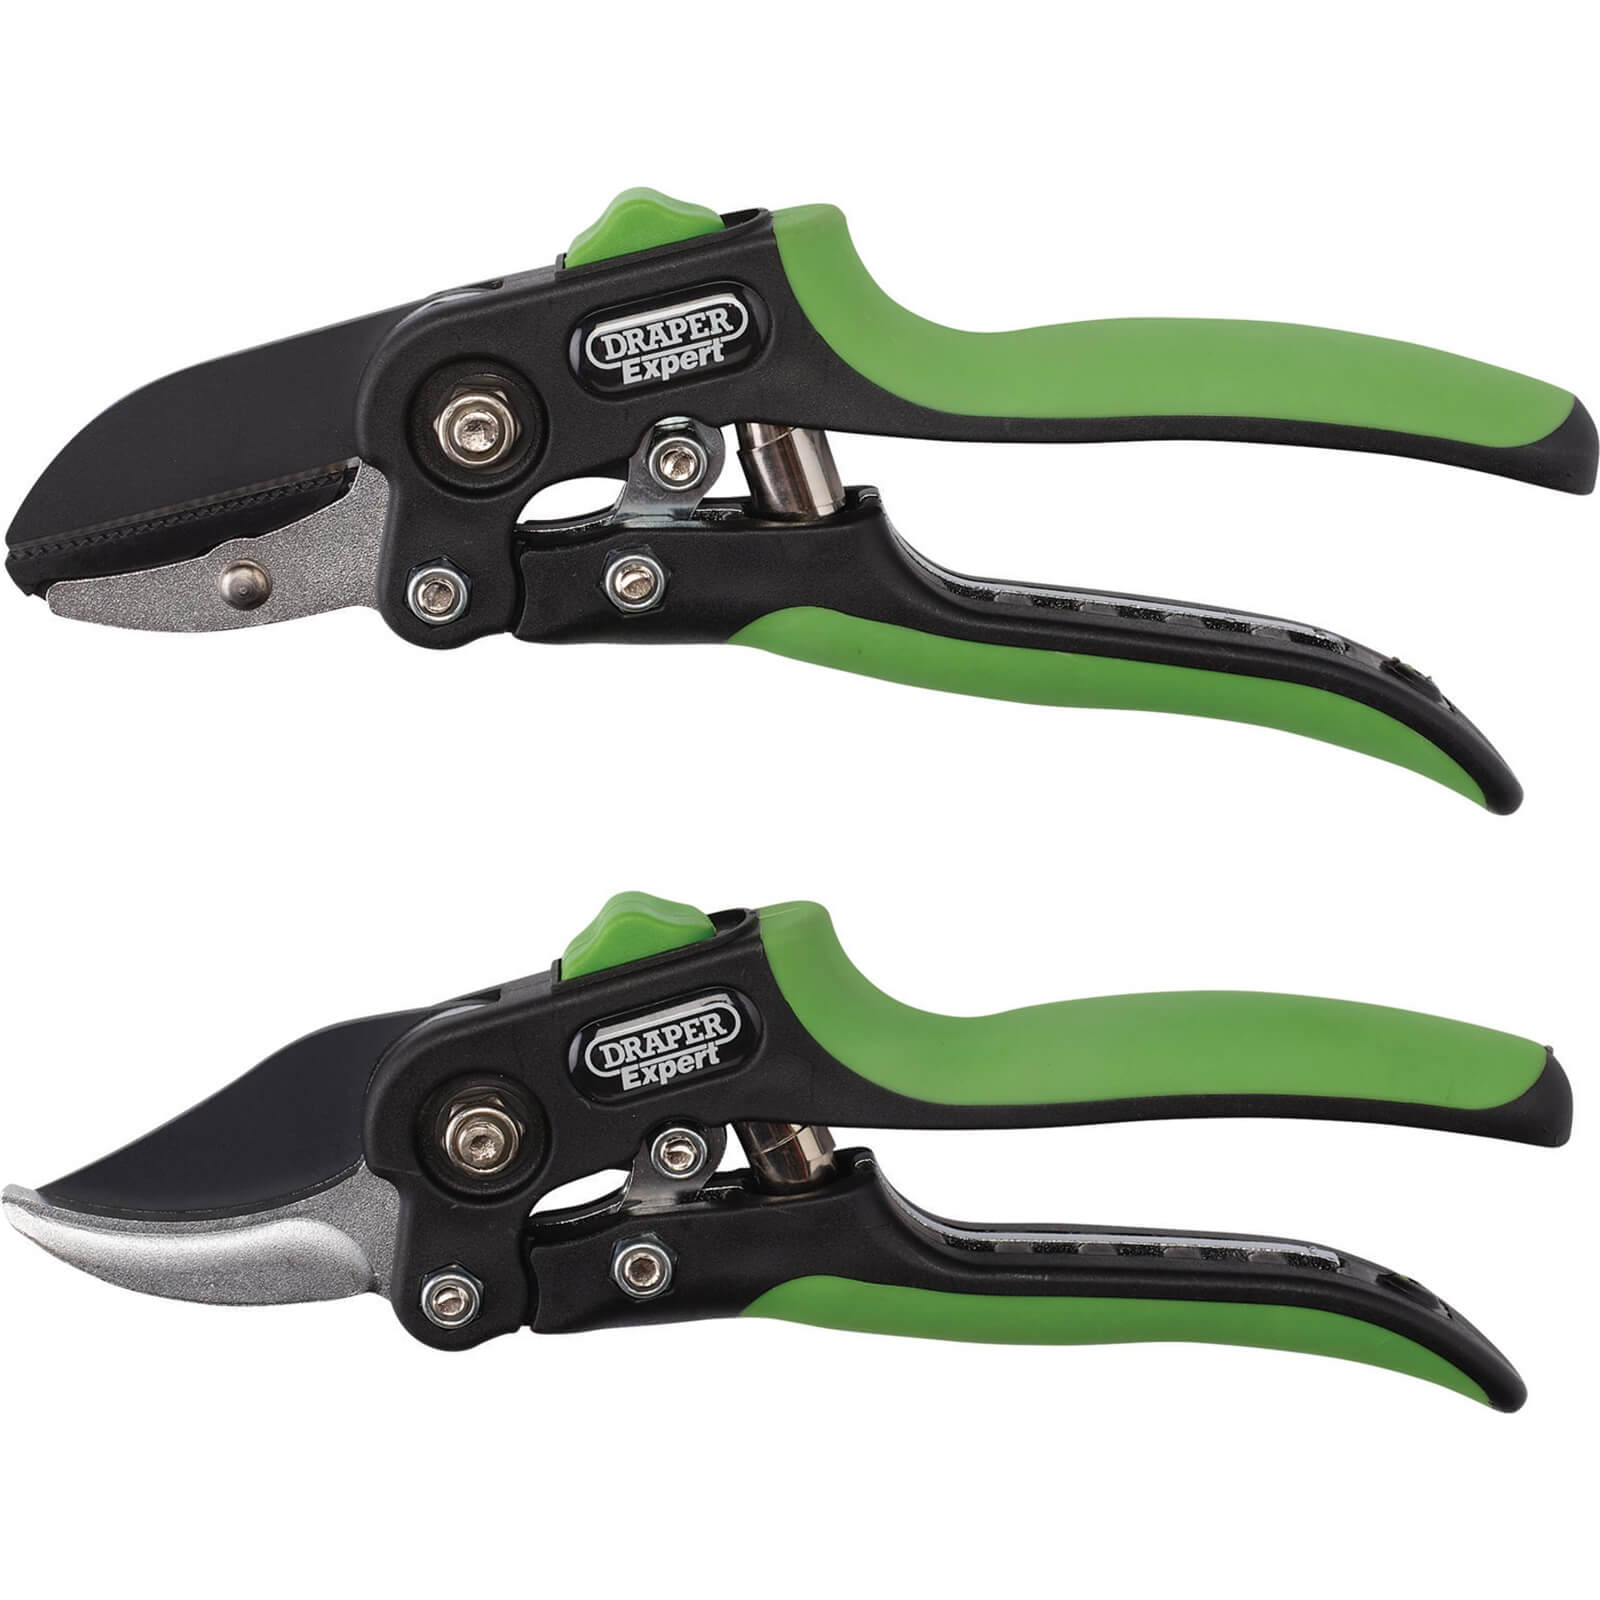 Image of Draper Expert Anvil and Bypass Secateurs Set